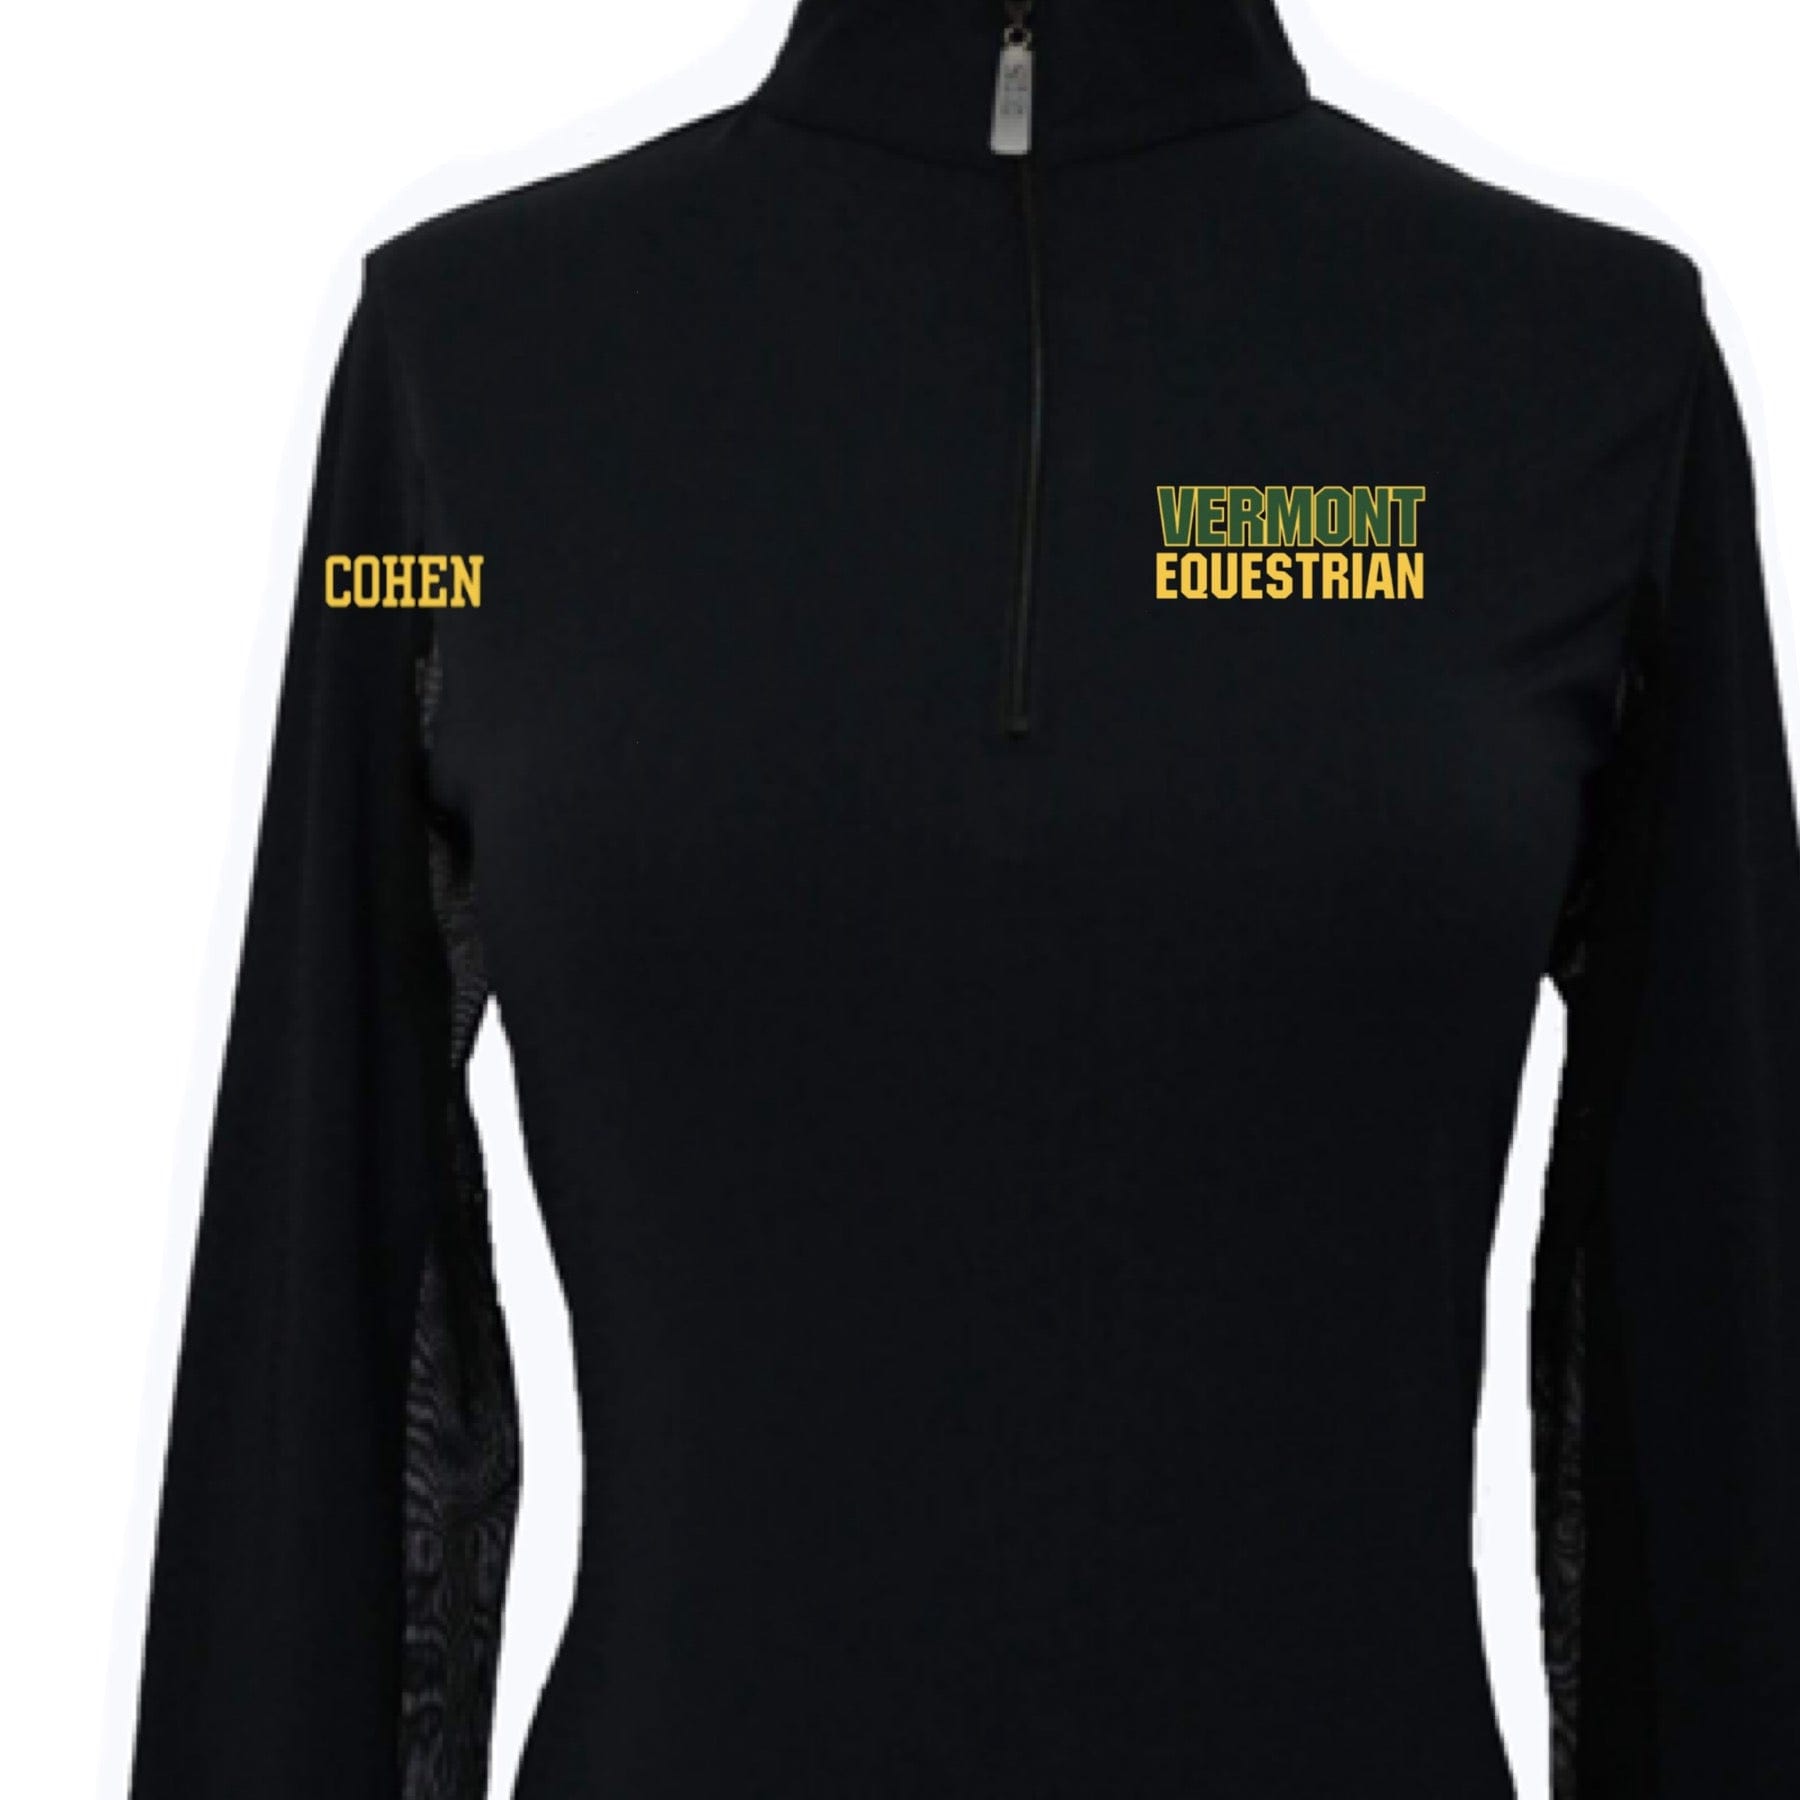 Equestrian Team Apparel Vermont Equestrian Sun Shirt equestrian team apparel online tack store mobile tack store custom farm apparel custom show stable clothing equestrian lifestyle horse show clothing riding clothes horses equestrian tack store